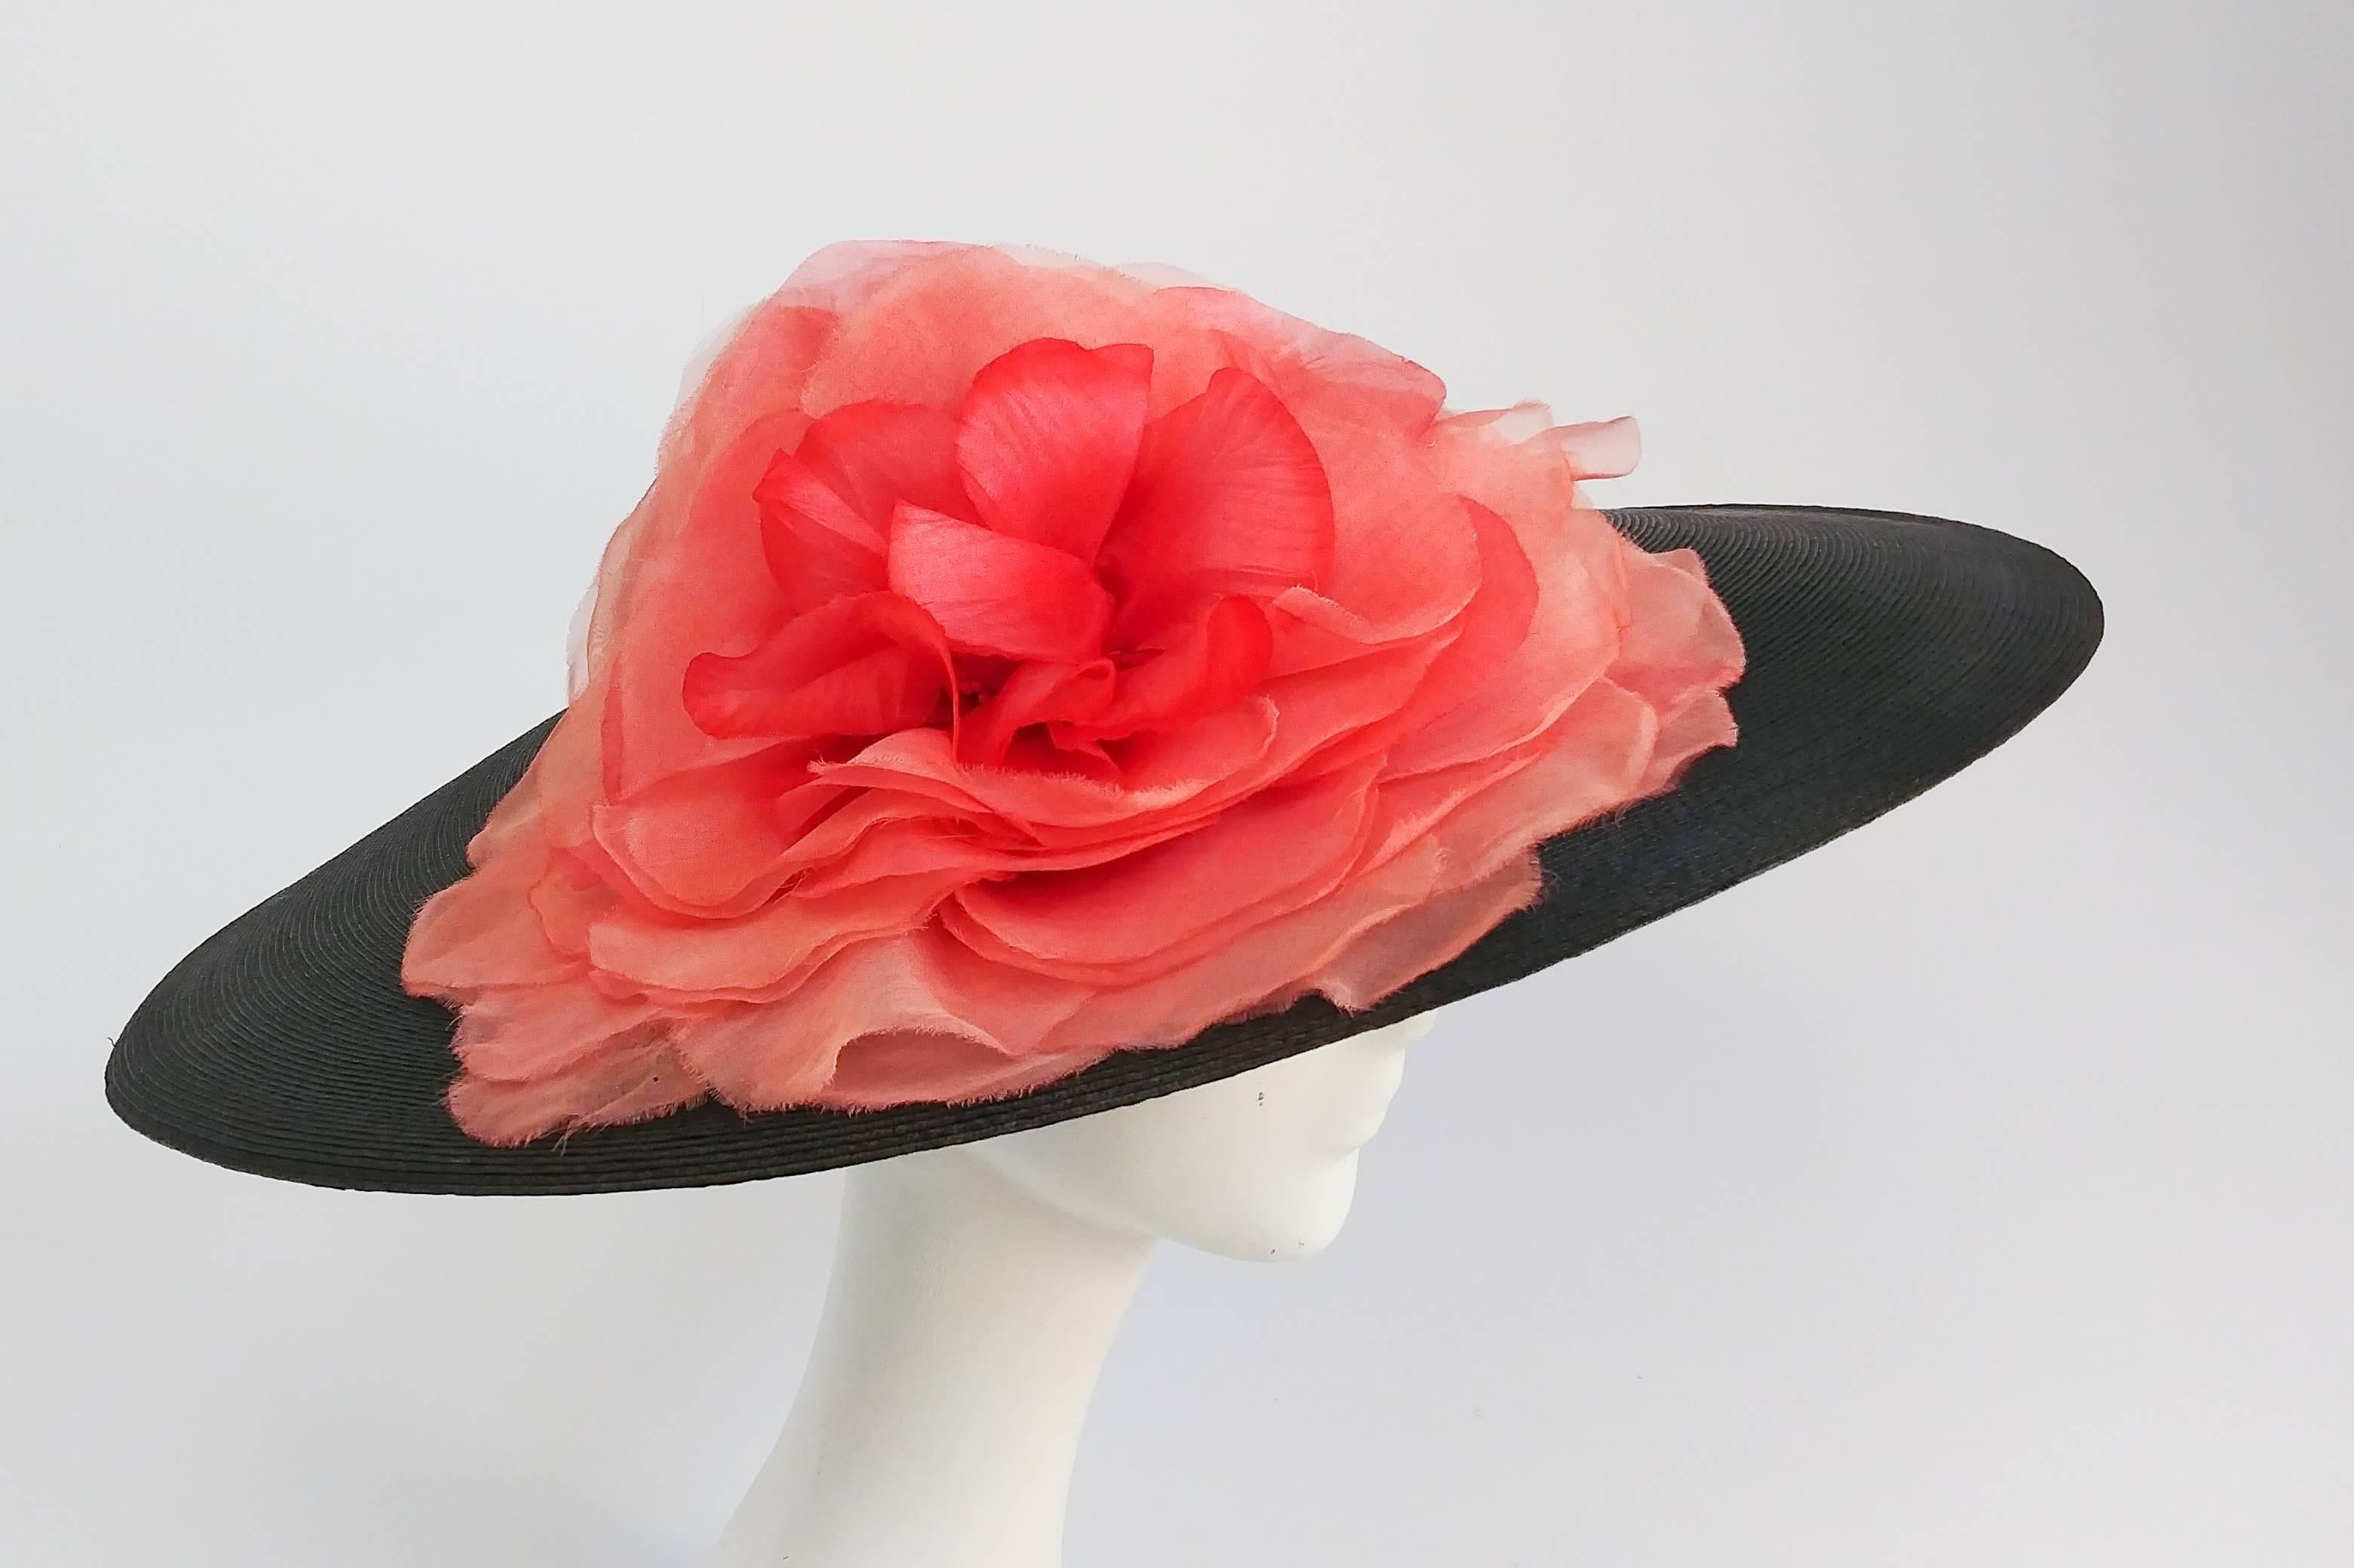 1950s Wide Brim Hat w/ Large Flower. Classic 1950s New Look shape hat with large silk flower and velvet band. 